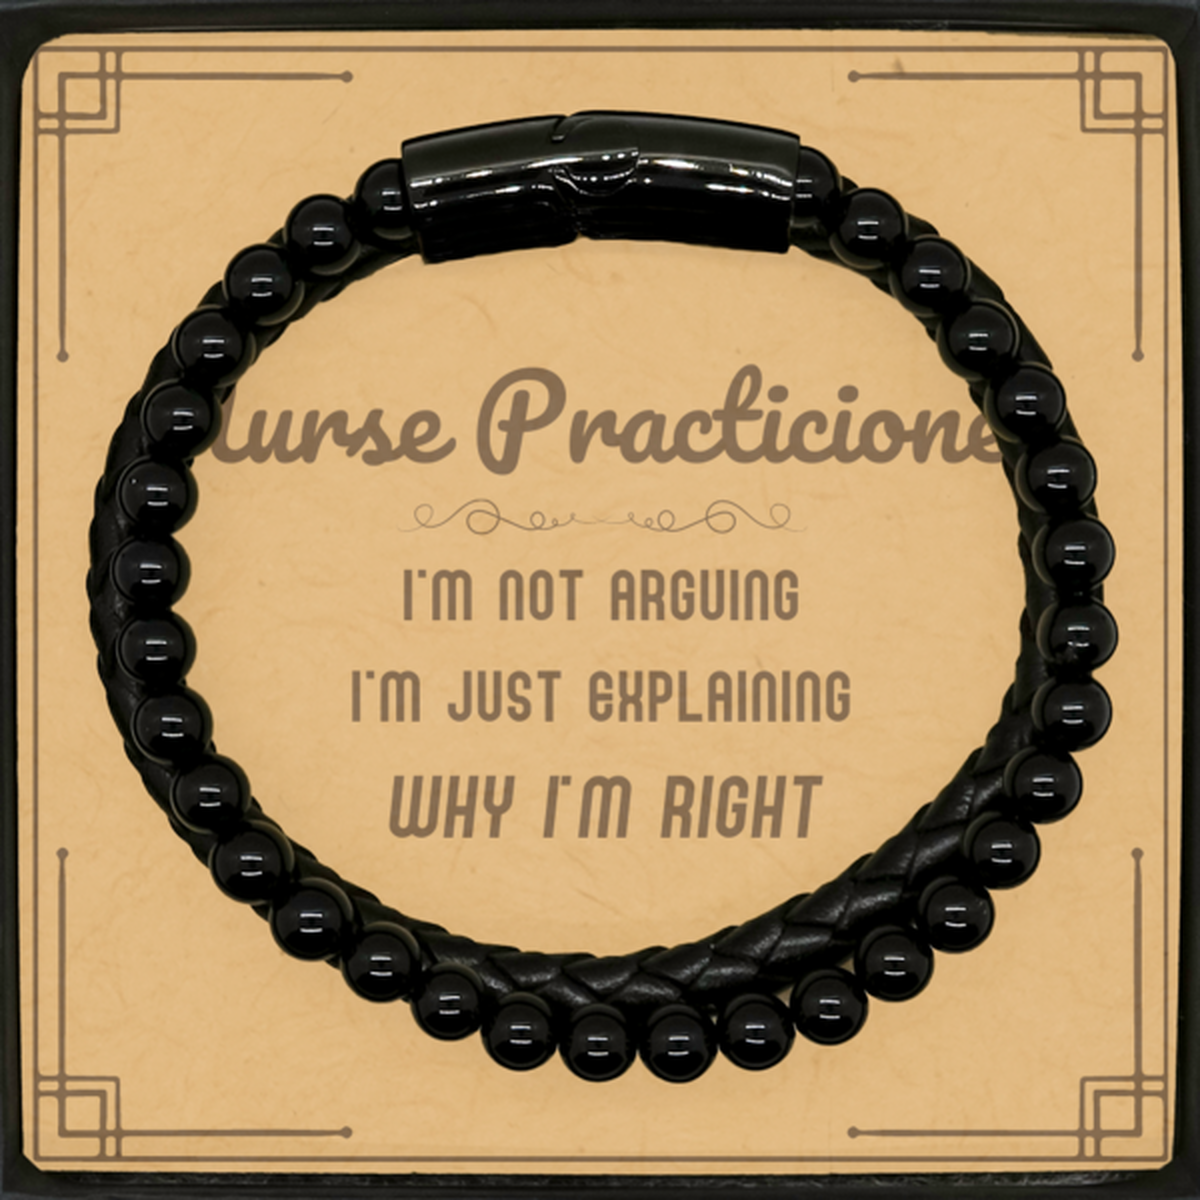 Nurse Practicioner I'm not Arguing. I'm Just Explaining Why I'm RIGHT Stone Leather Bracelets, Funny Saying Quote Nurse Practicioner Gifts For Nurse Practicioner Message Card Graduation Birthday Christmas Gifts for Men Women Coworker